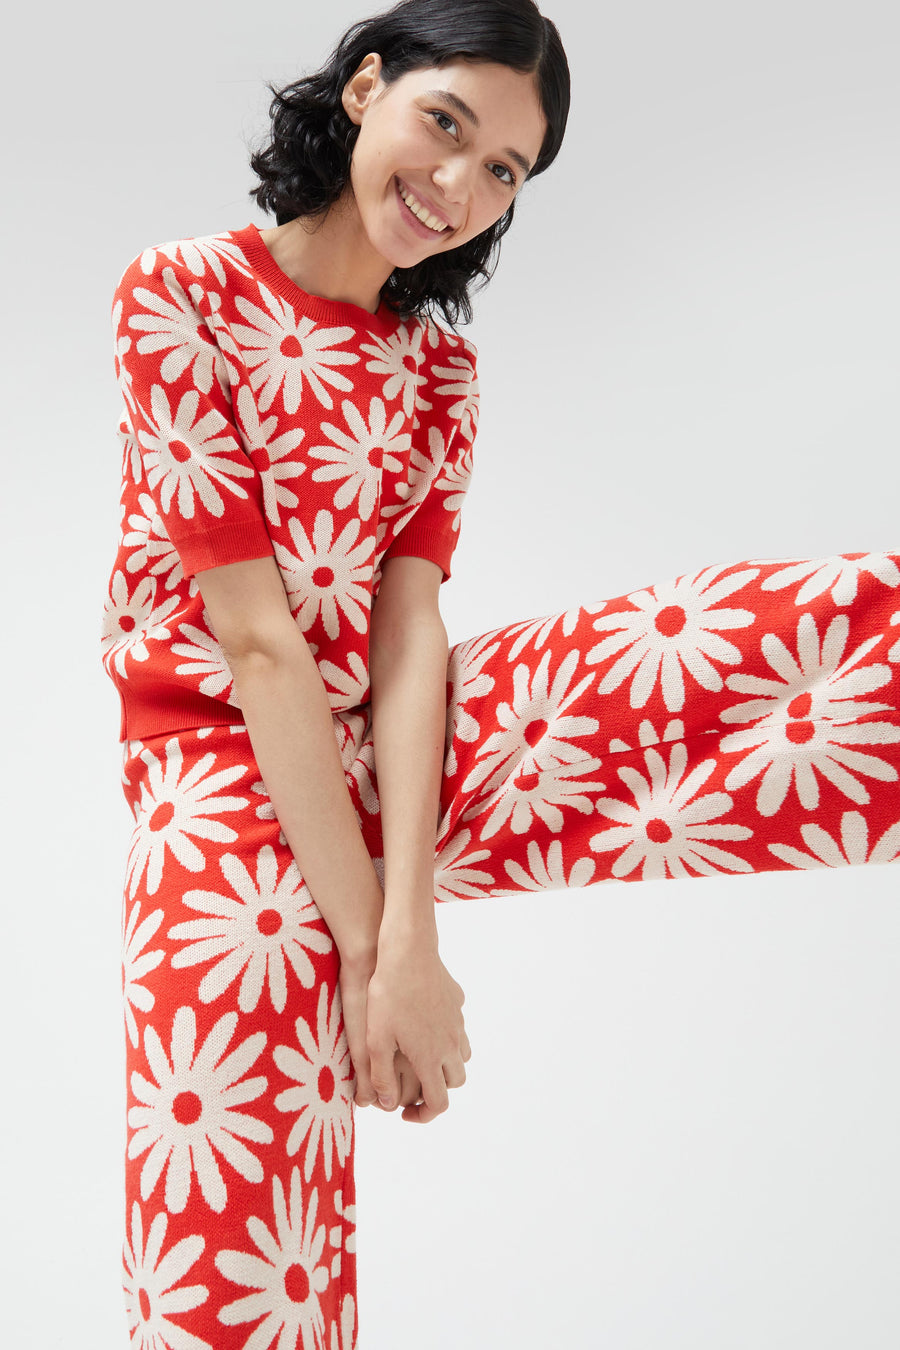 Floral Jacquard Top in Red and White